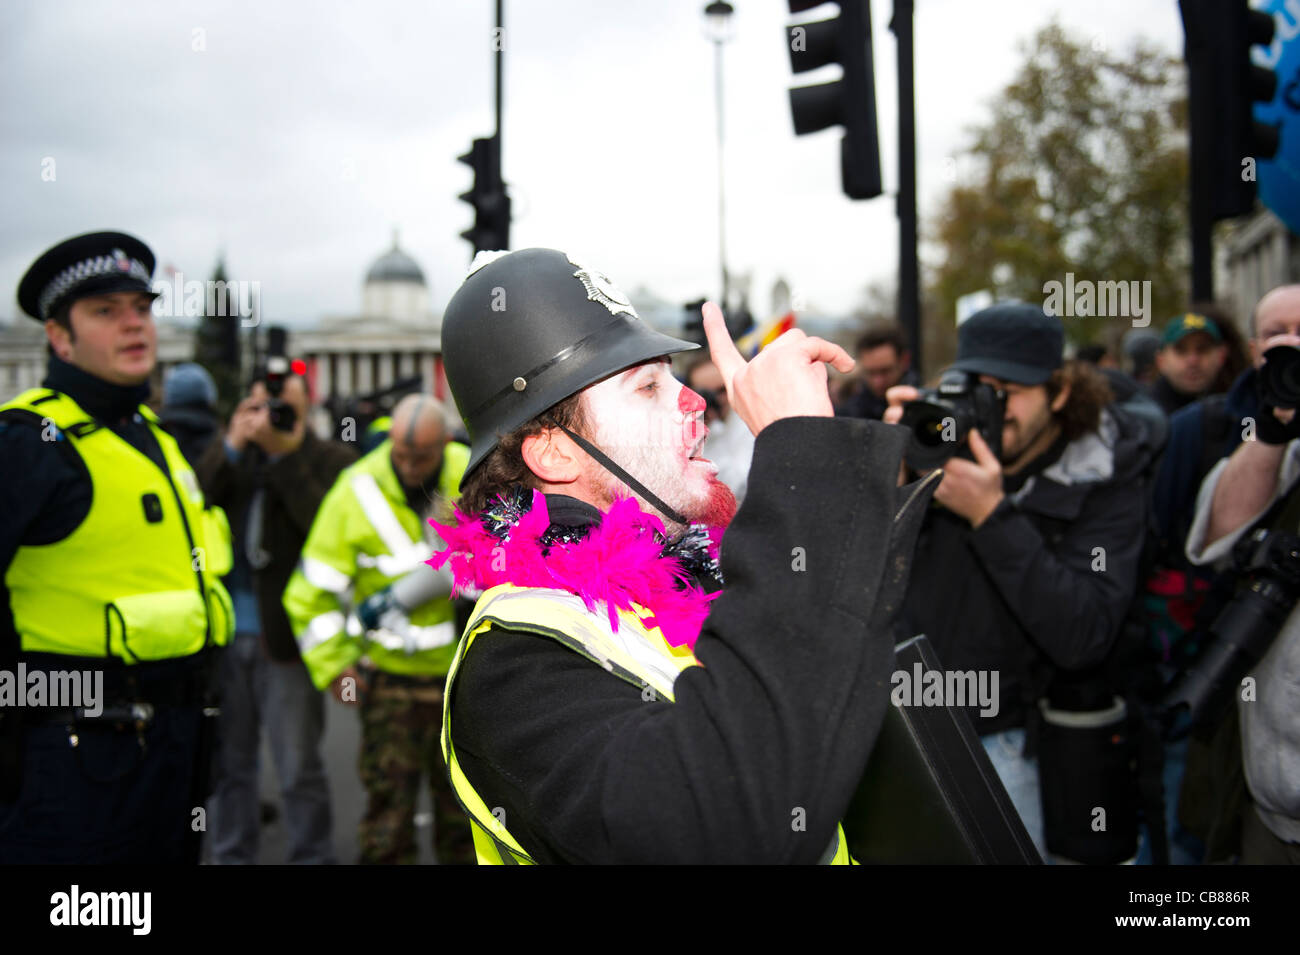 A male demonstrator wearing clown make up and plastic police helmet in Trafalgar Square, London. Stock Photo